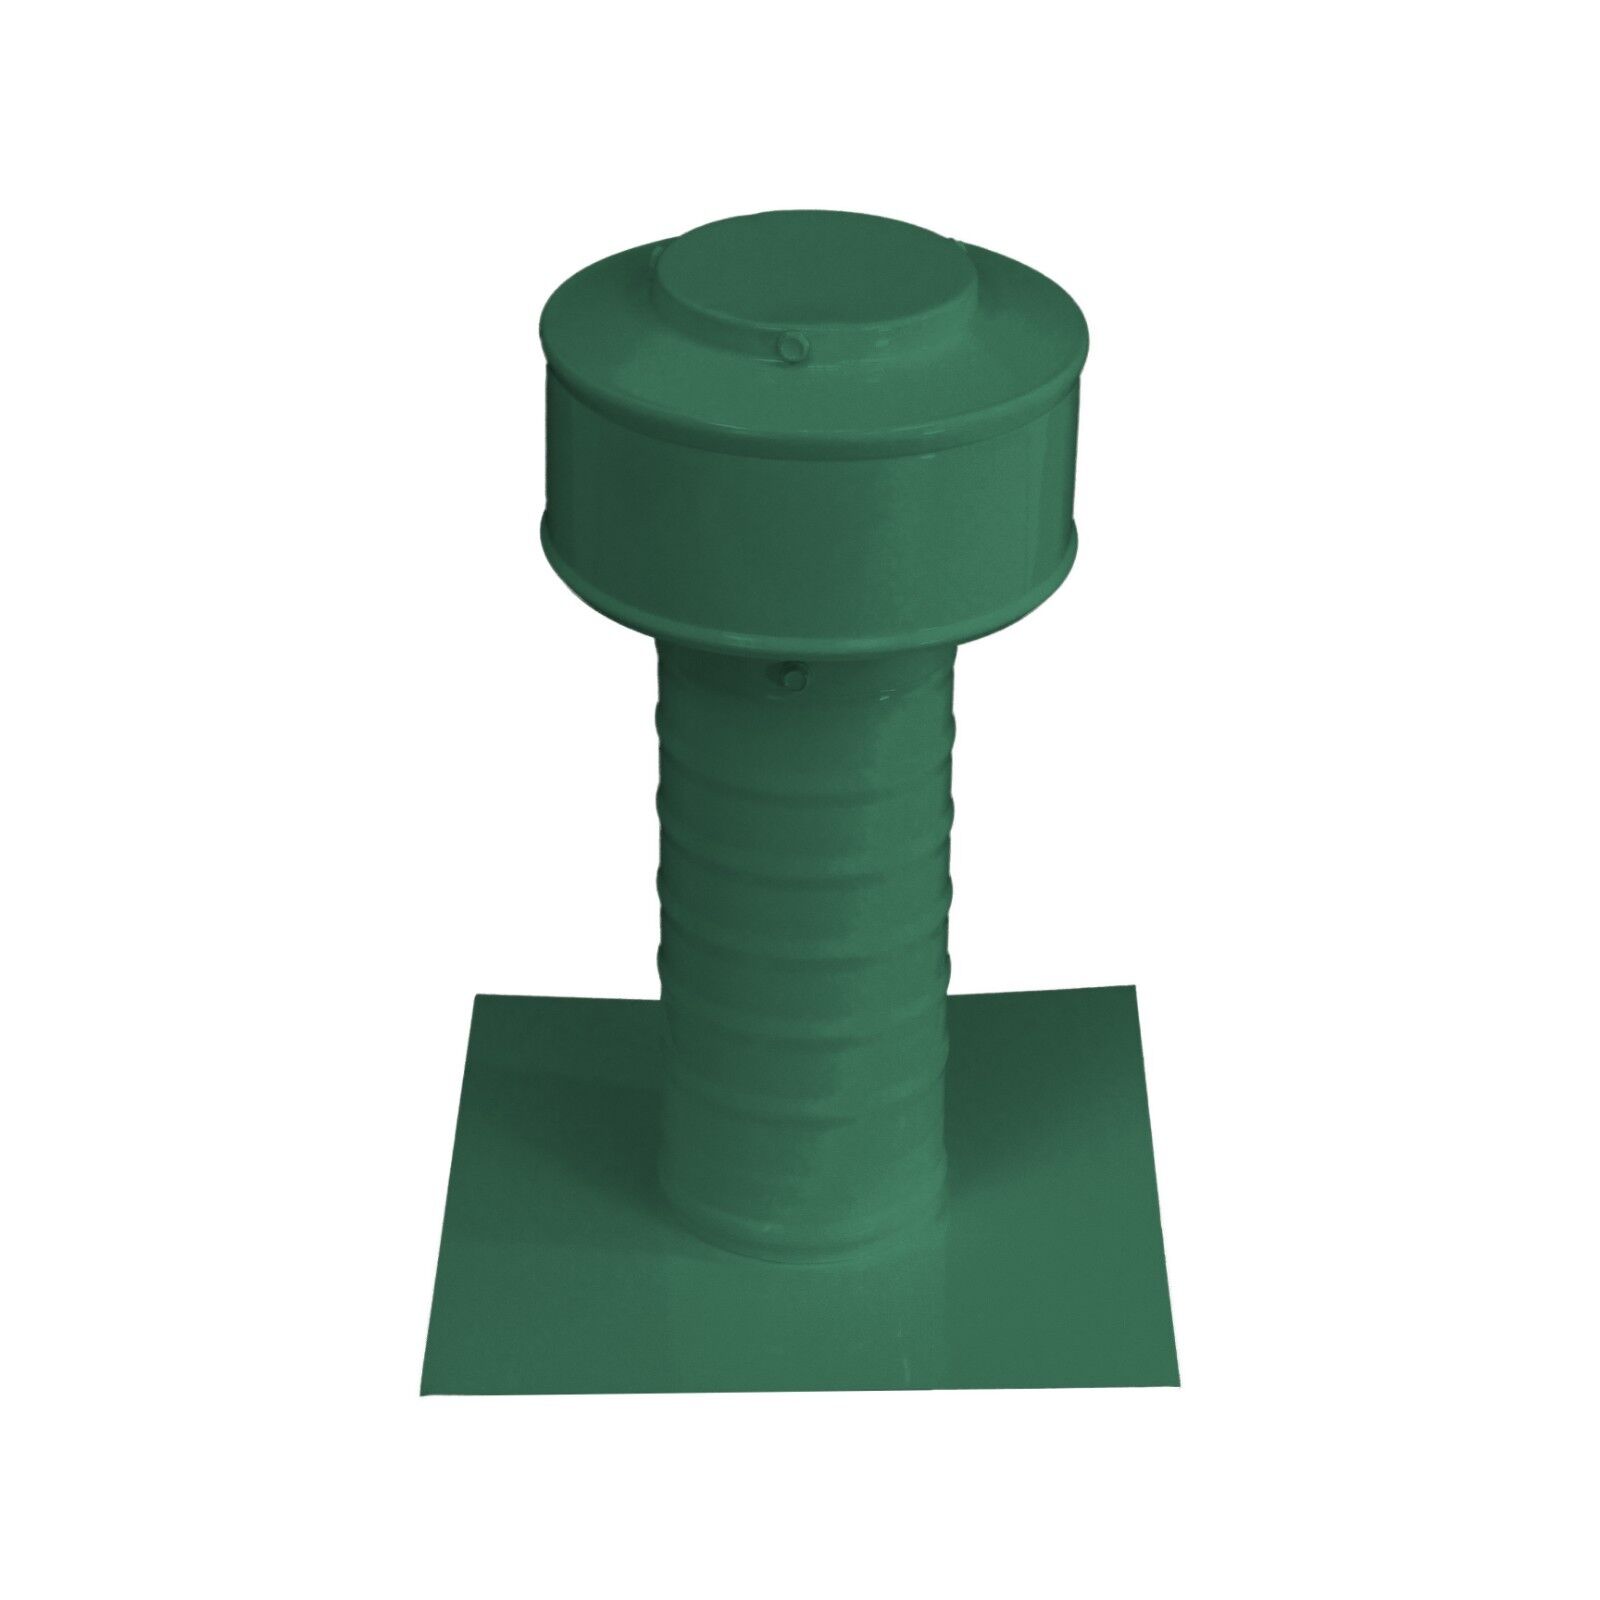 3 inch diameter Keepa Vent an Aluminum Roof Vent for Flat Roofs in Green